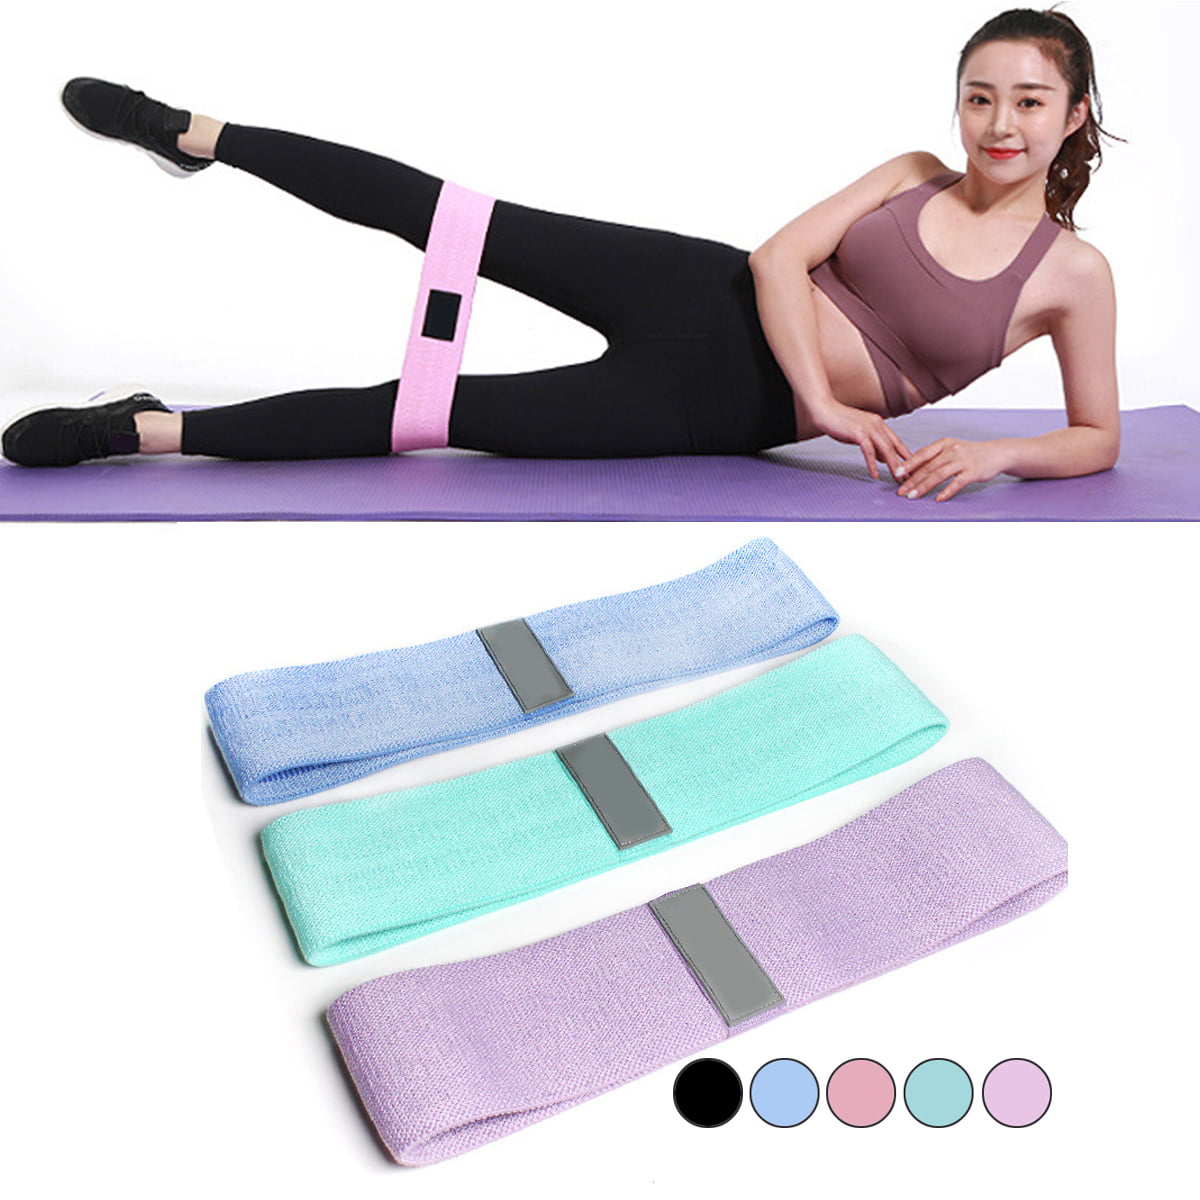 Fit Exercise Yoga Fitness Hip Leg Booty Resistance Bands Loop Workout Non Slip 